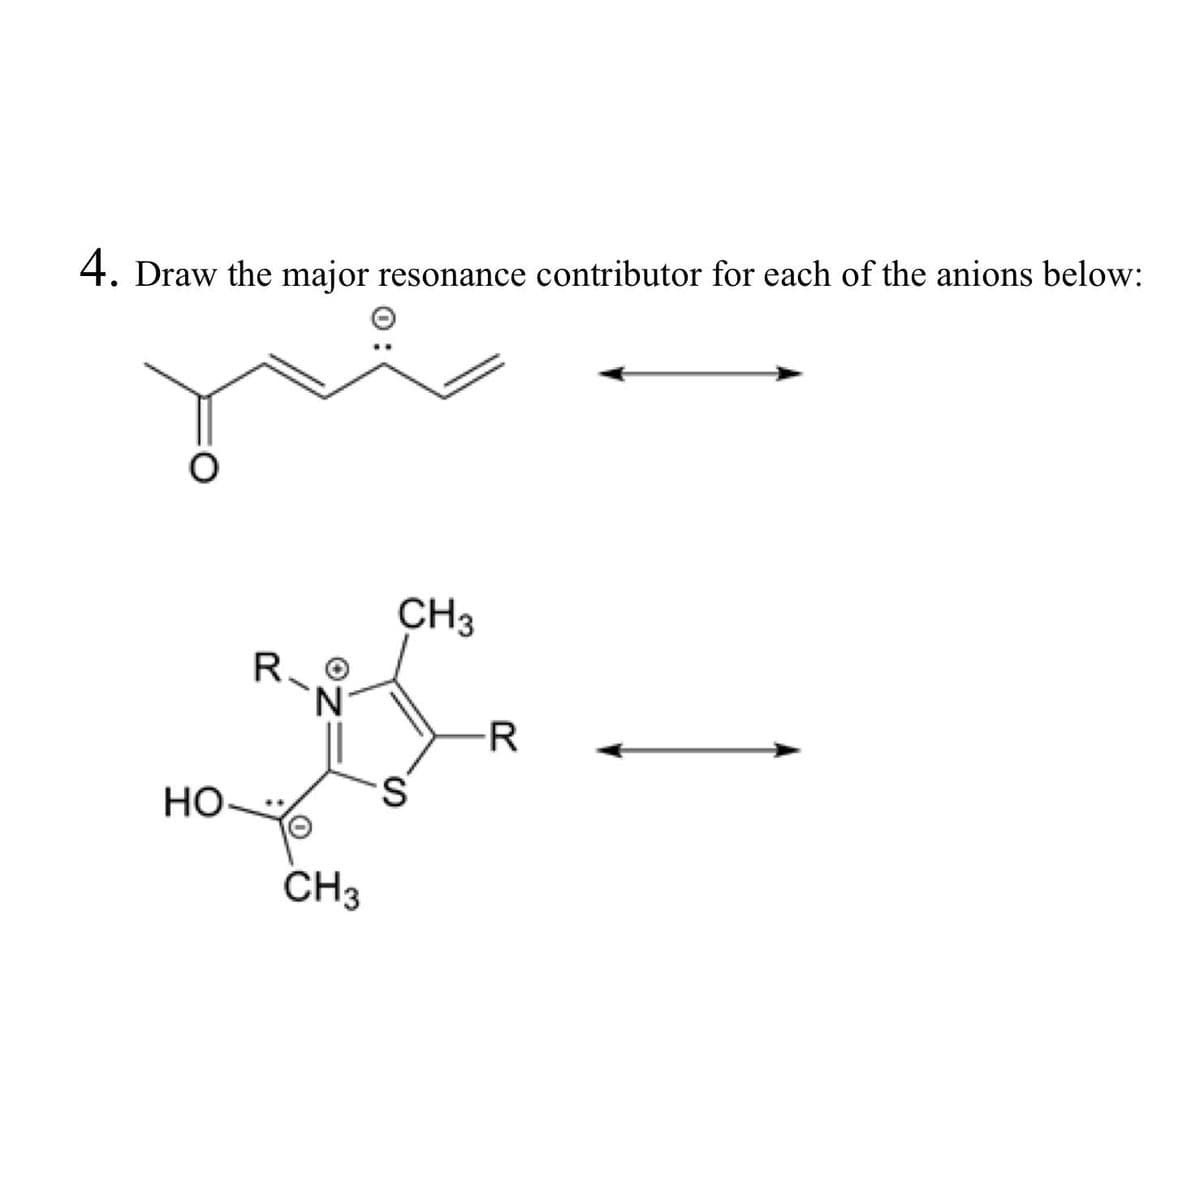 4. Draw the major resonance contributor for each of the anions below:
jui
O
HO
R
CH3
CH3
S
R